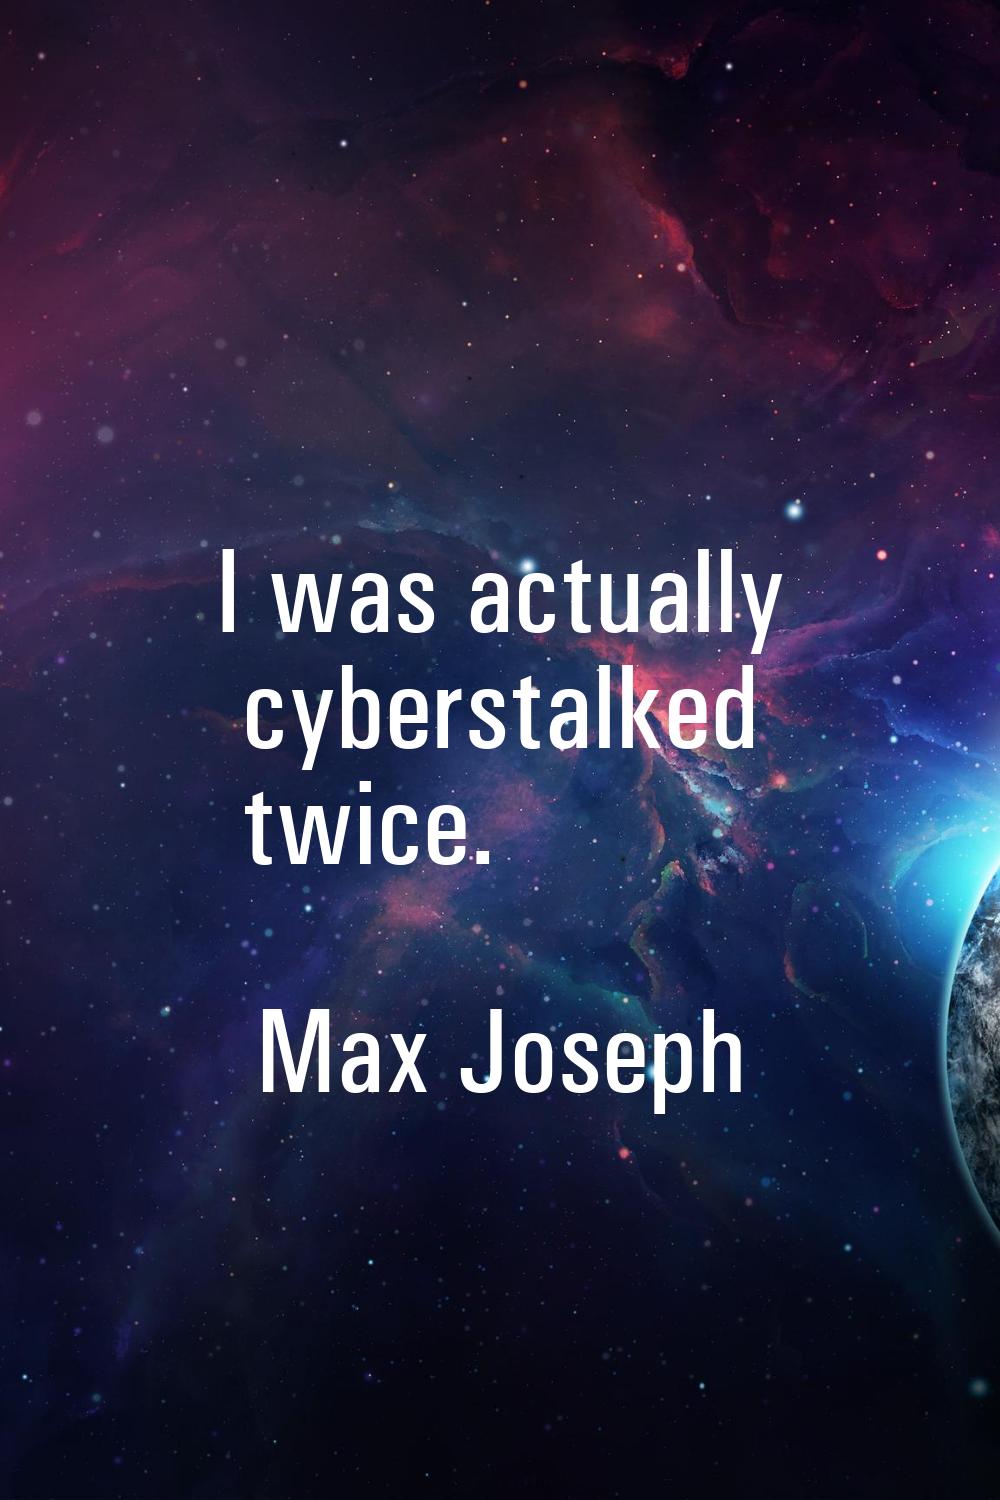 I was actually cyberstalked twice.